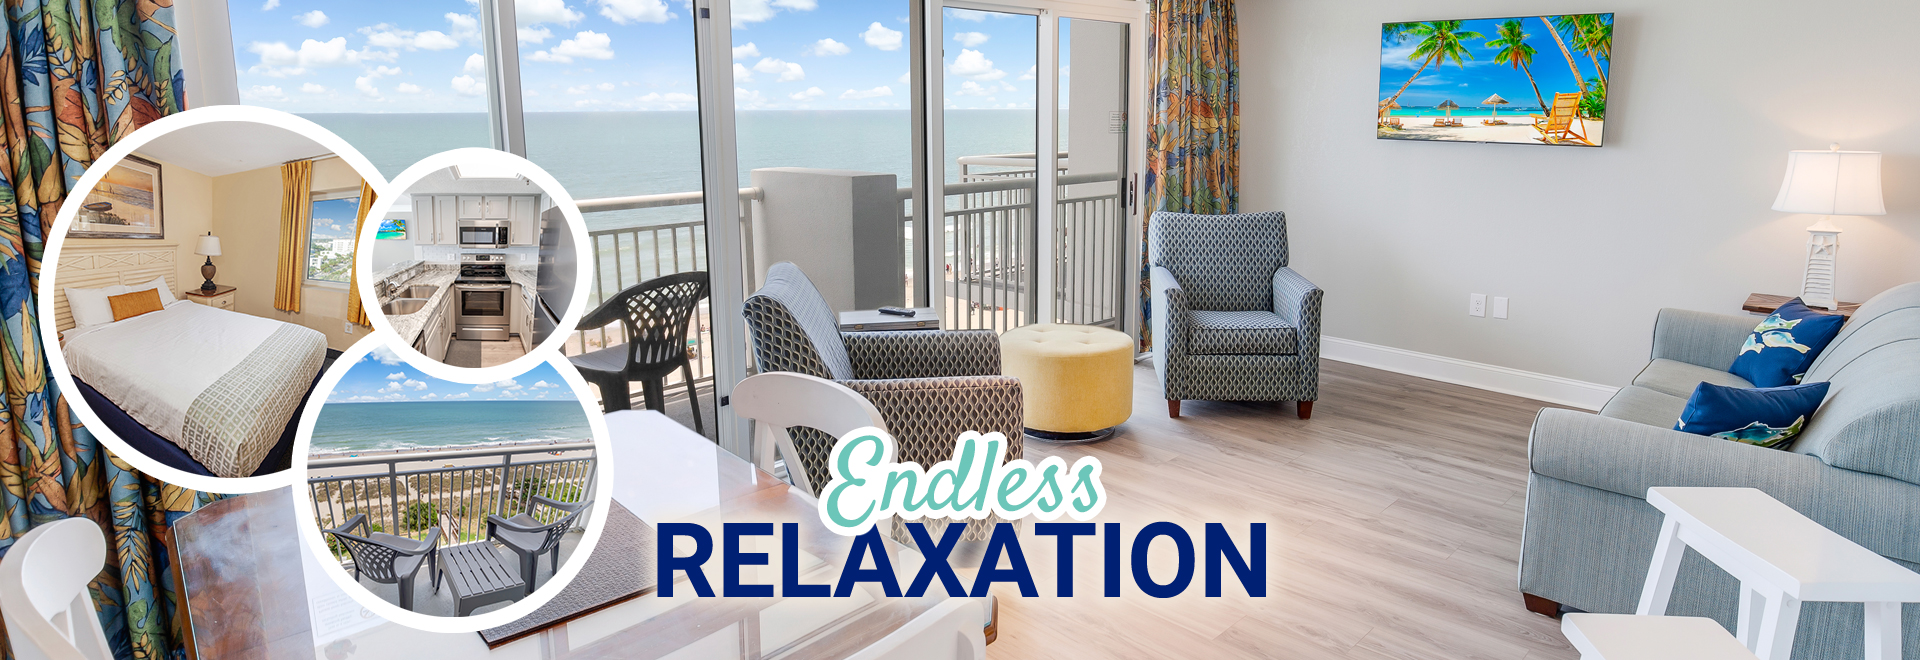 Endless Relaxation 1920x660 1 